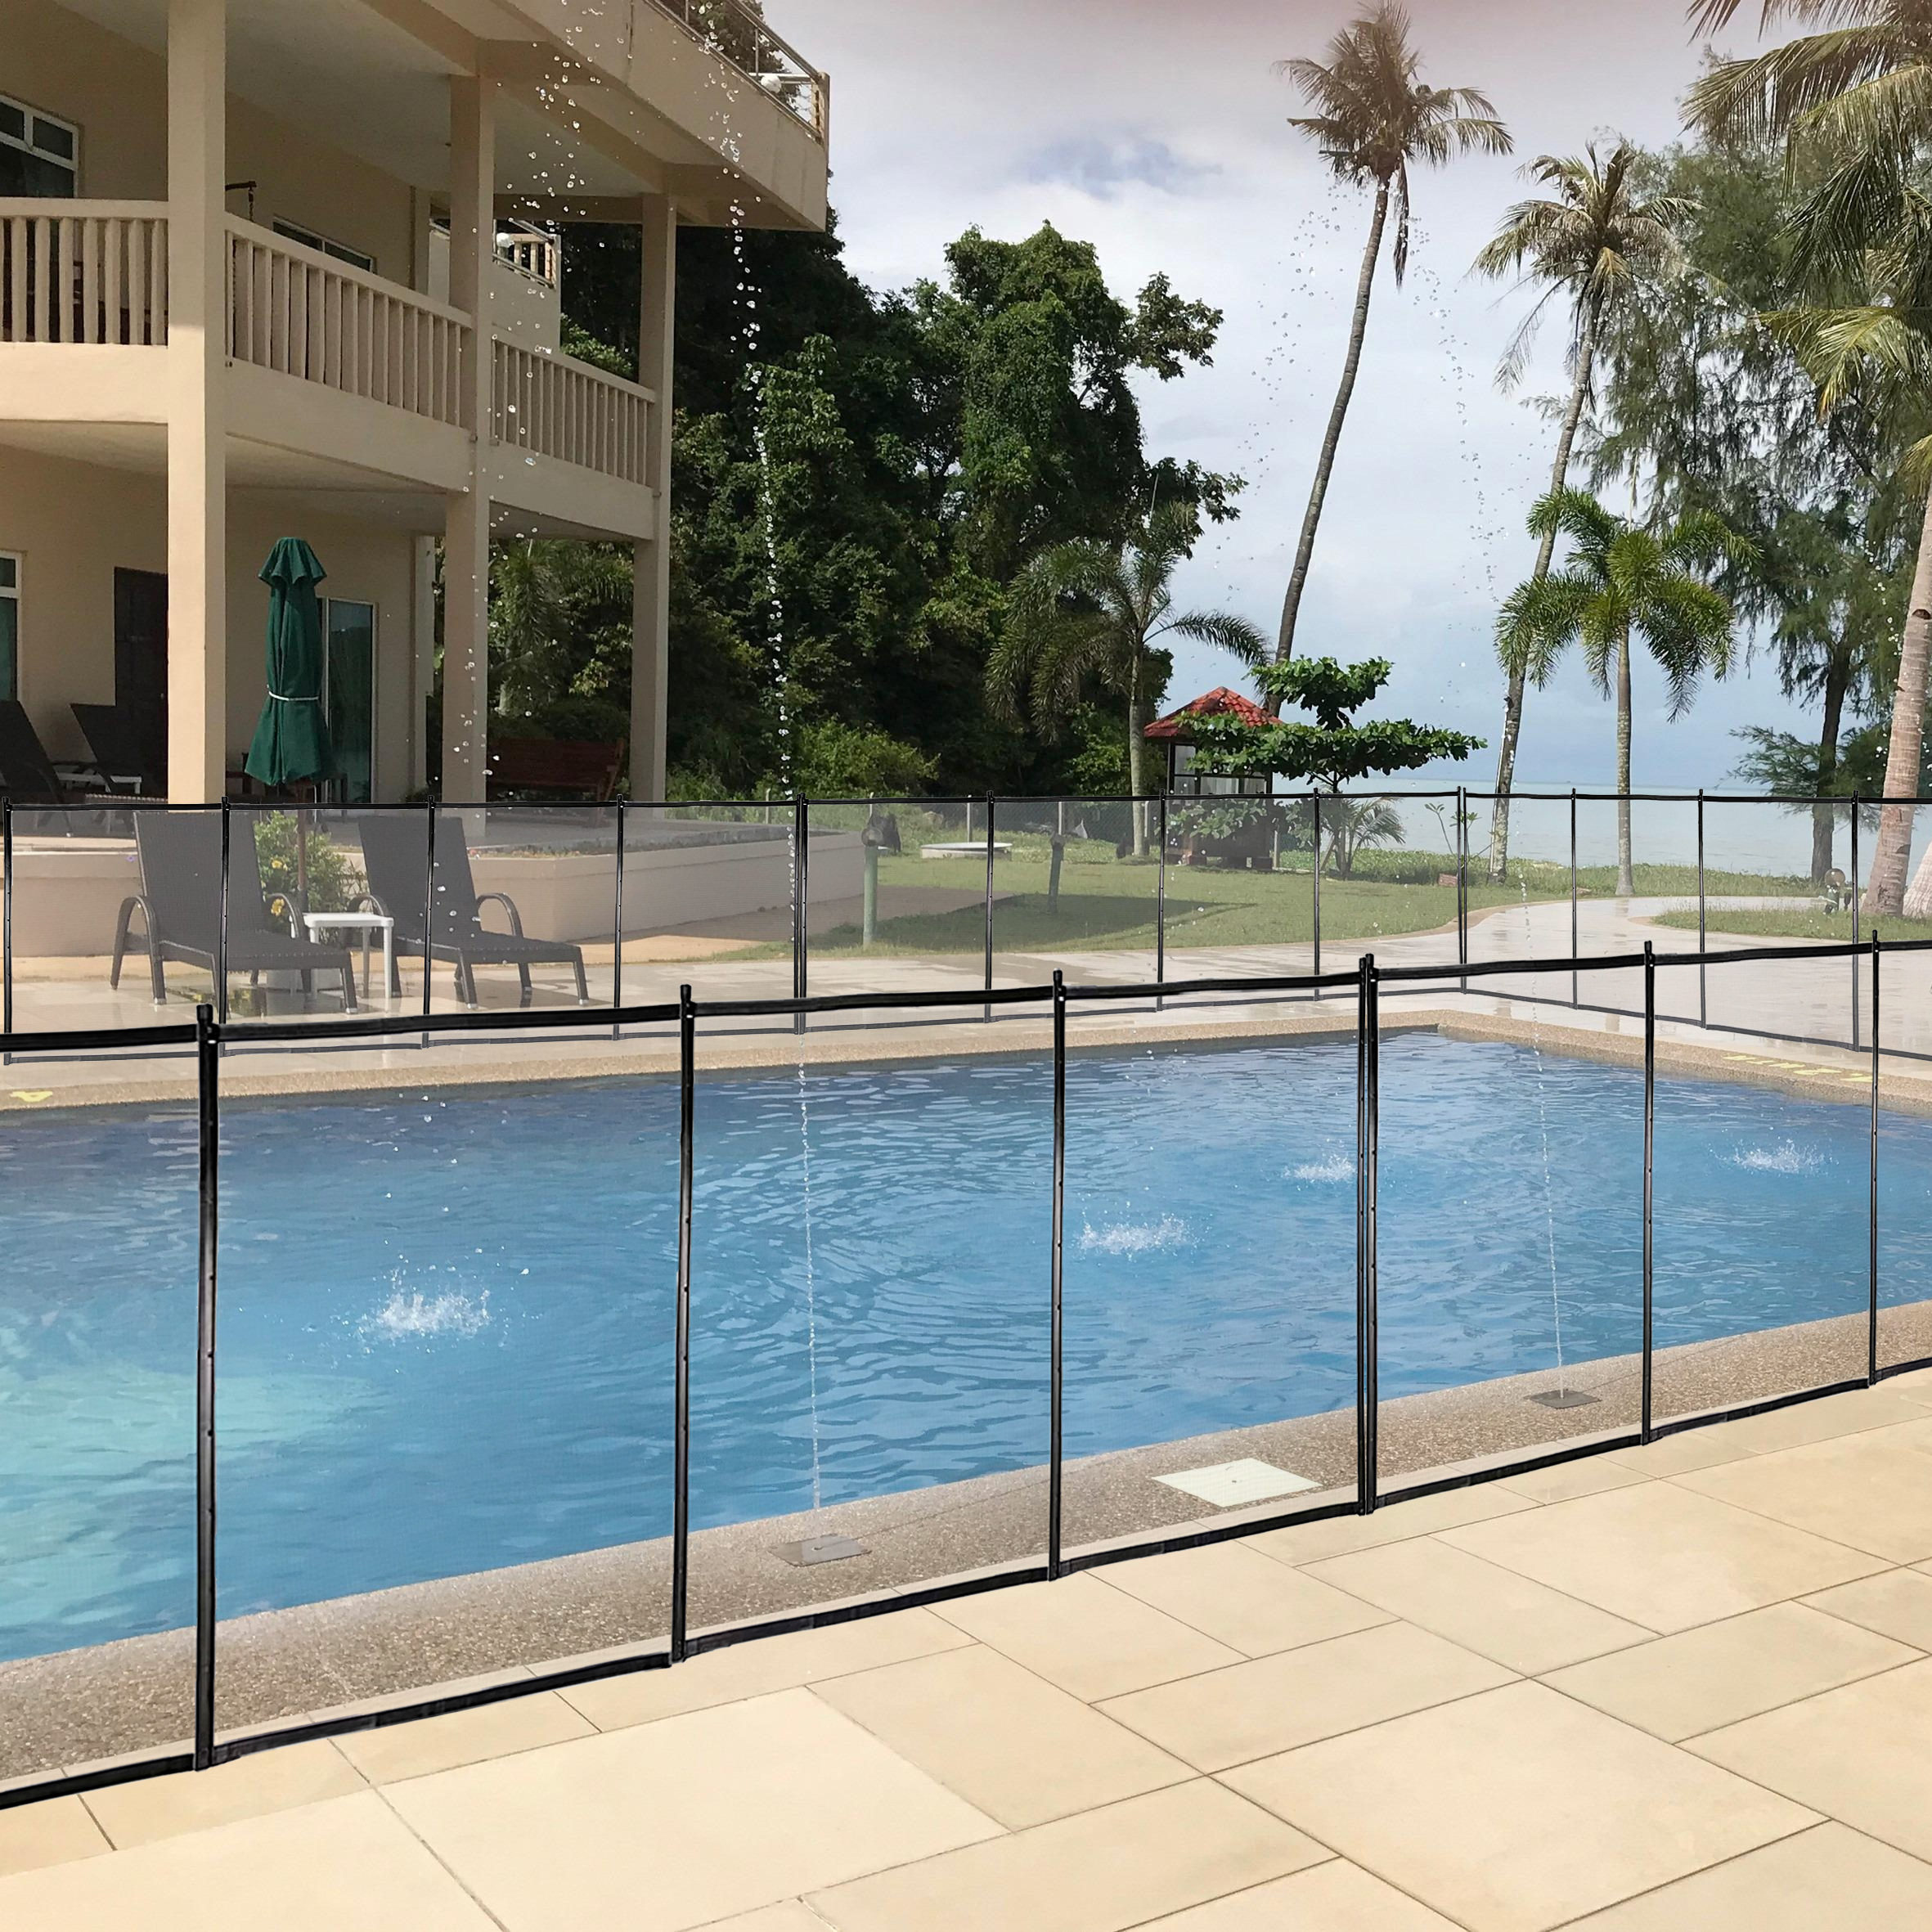 12x4 Ft Outdoor Pool Fence With Section Kit,Removable Mesh Barrier,For Inground Pools,Garden And Patio,Black-Boyel Living